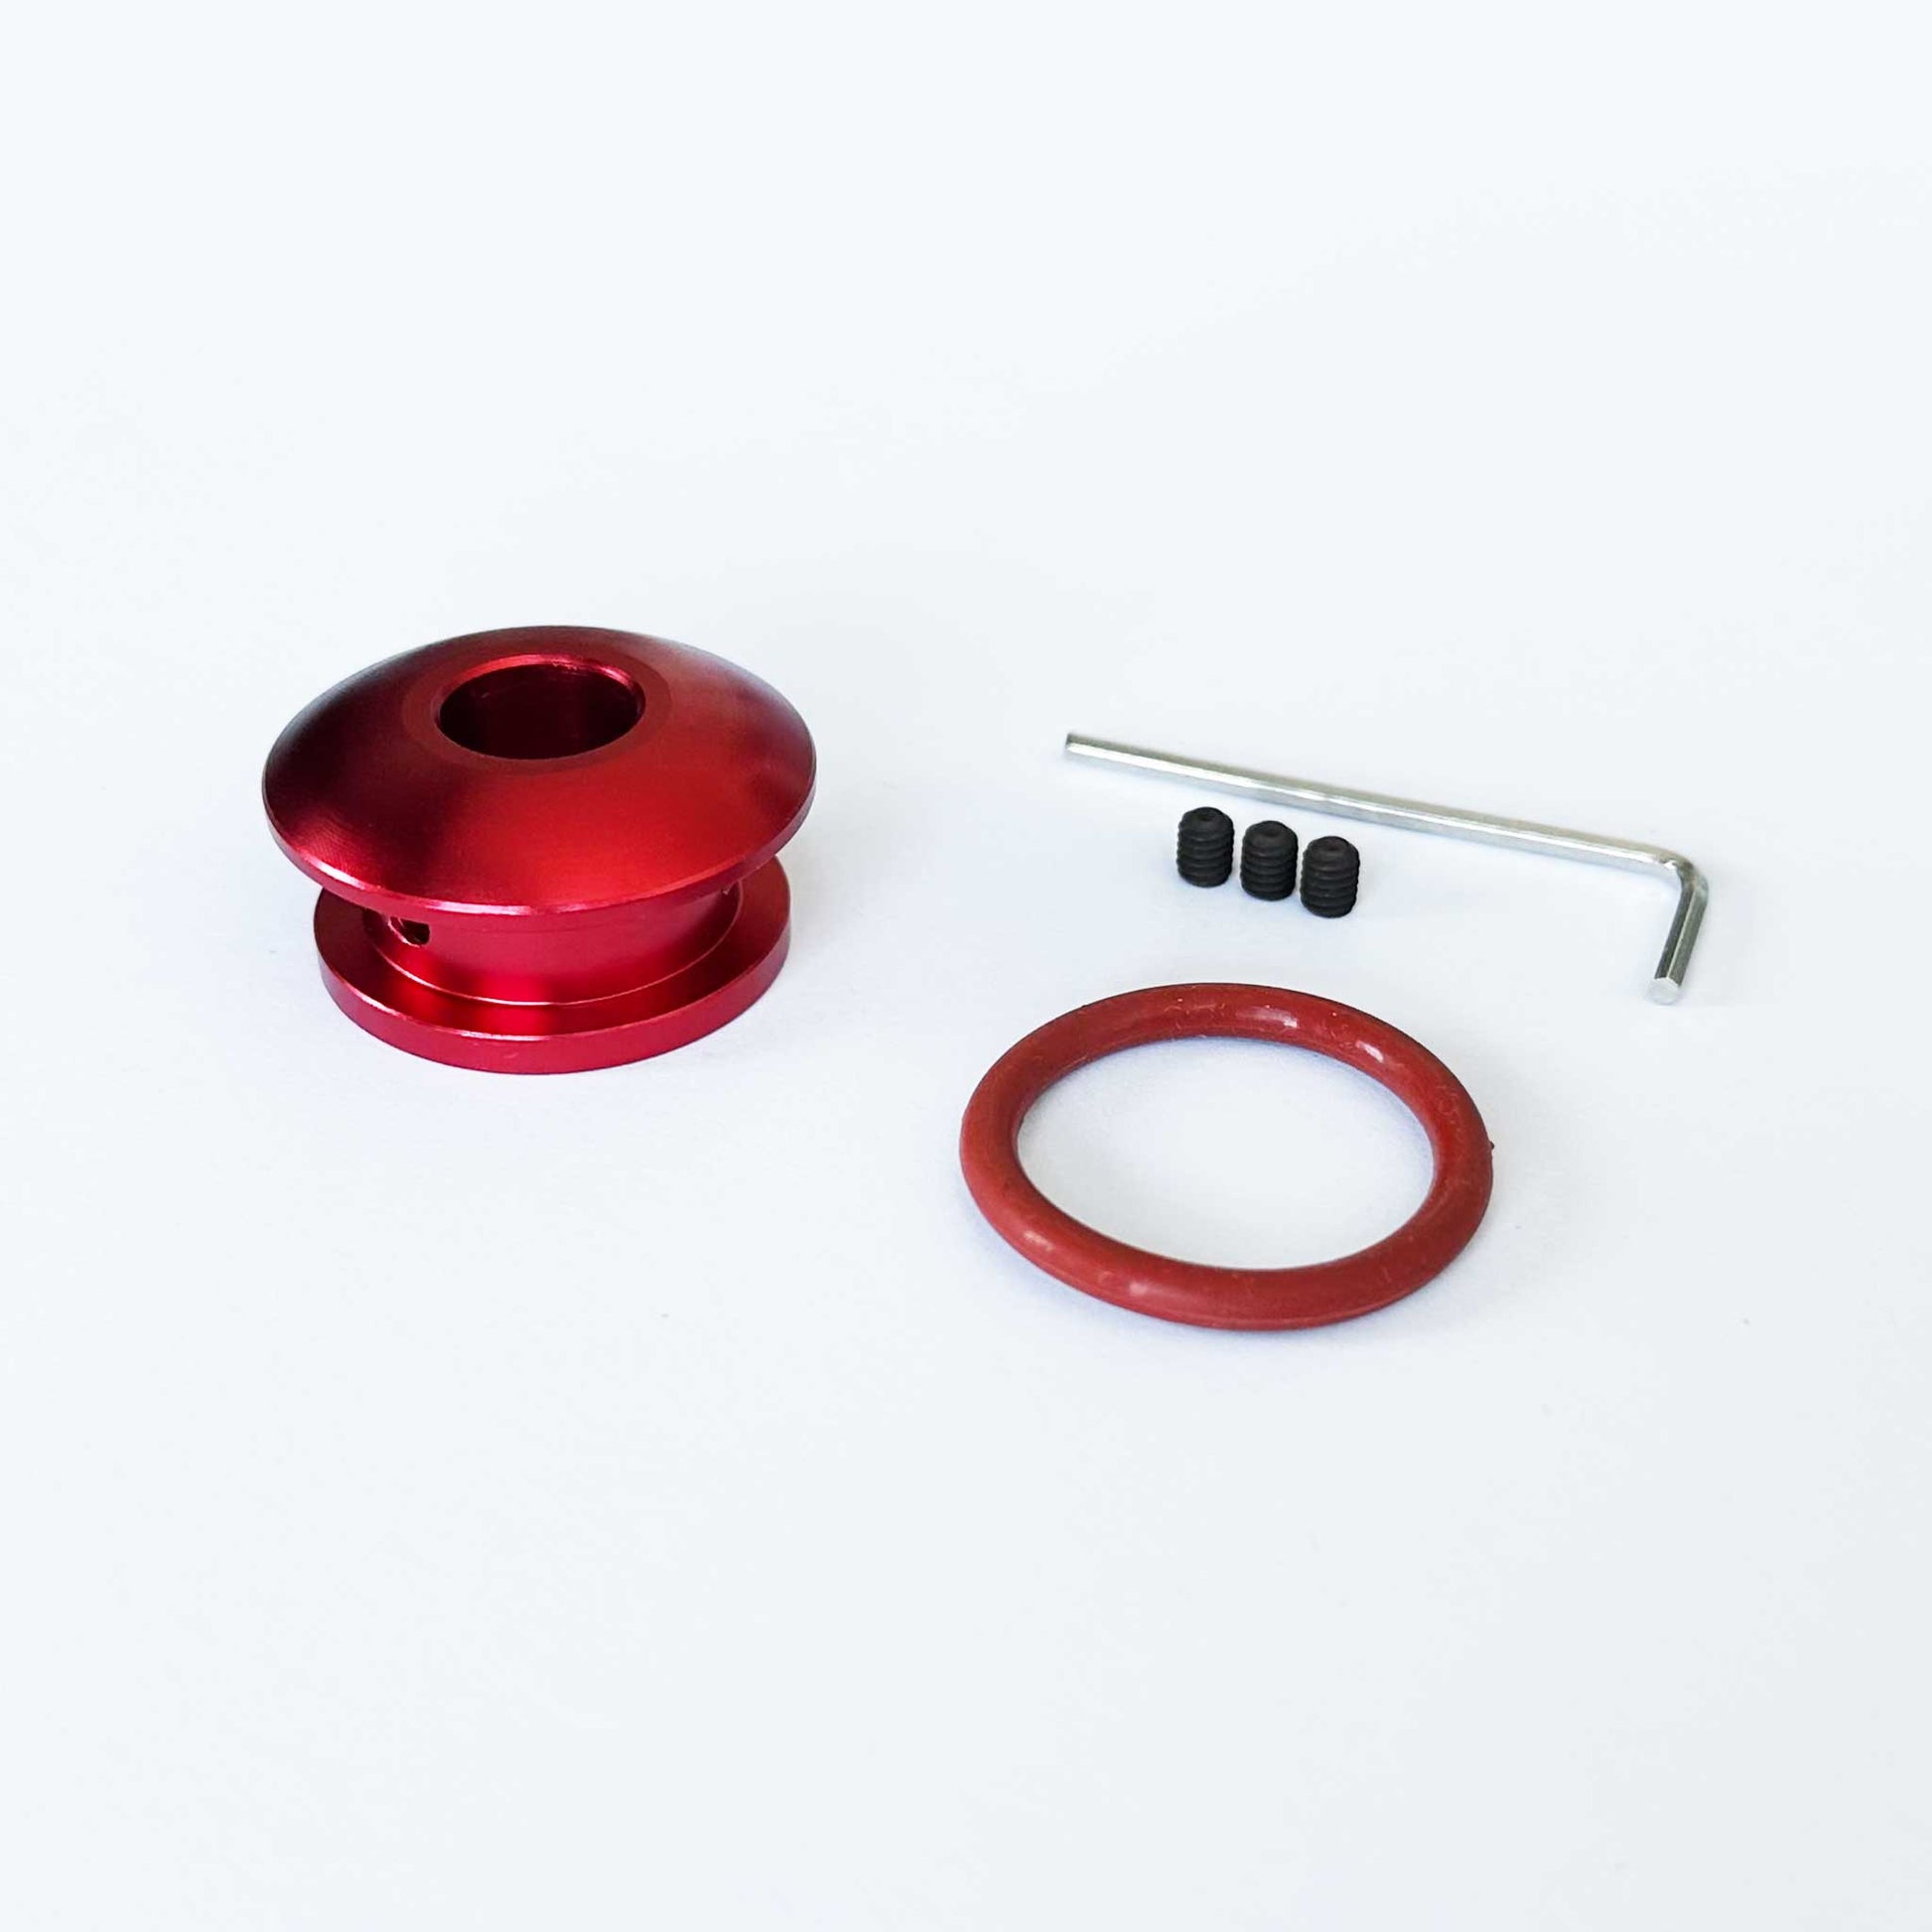 A red non-threaded boot retainer is standing upright on a white background with installation tools beside it